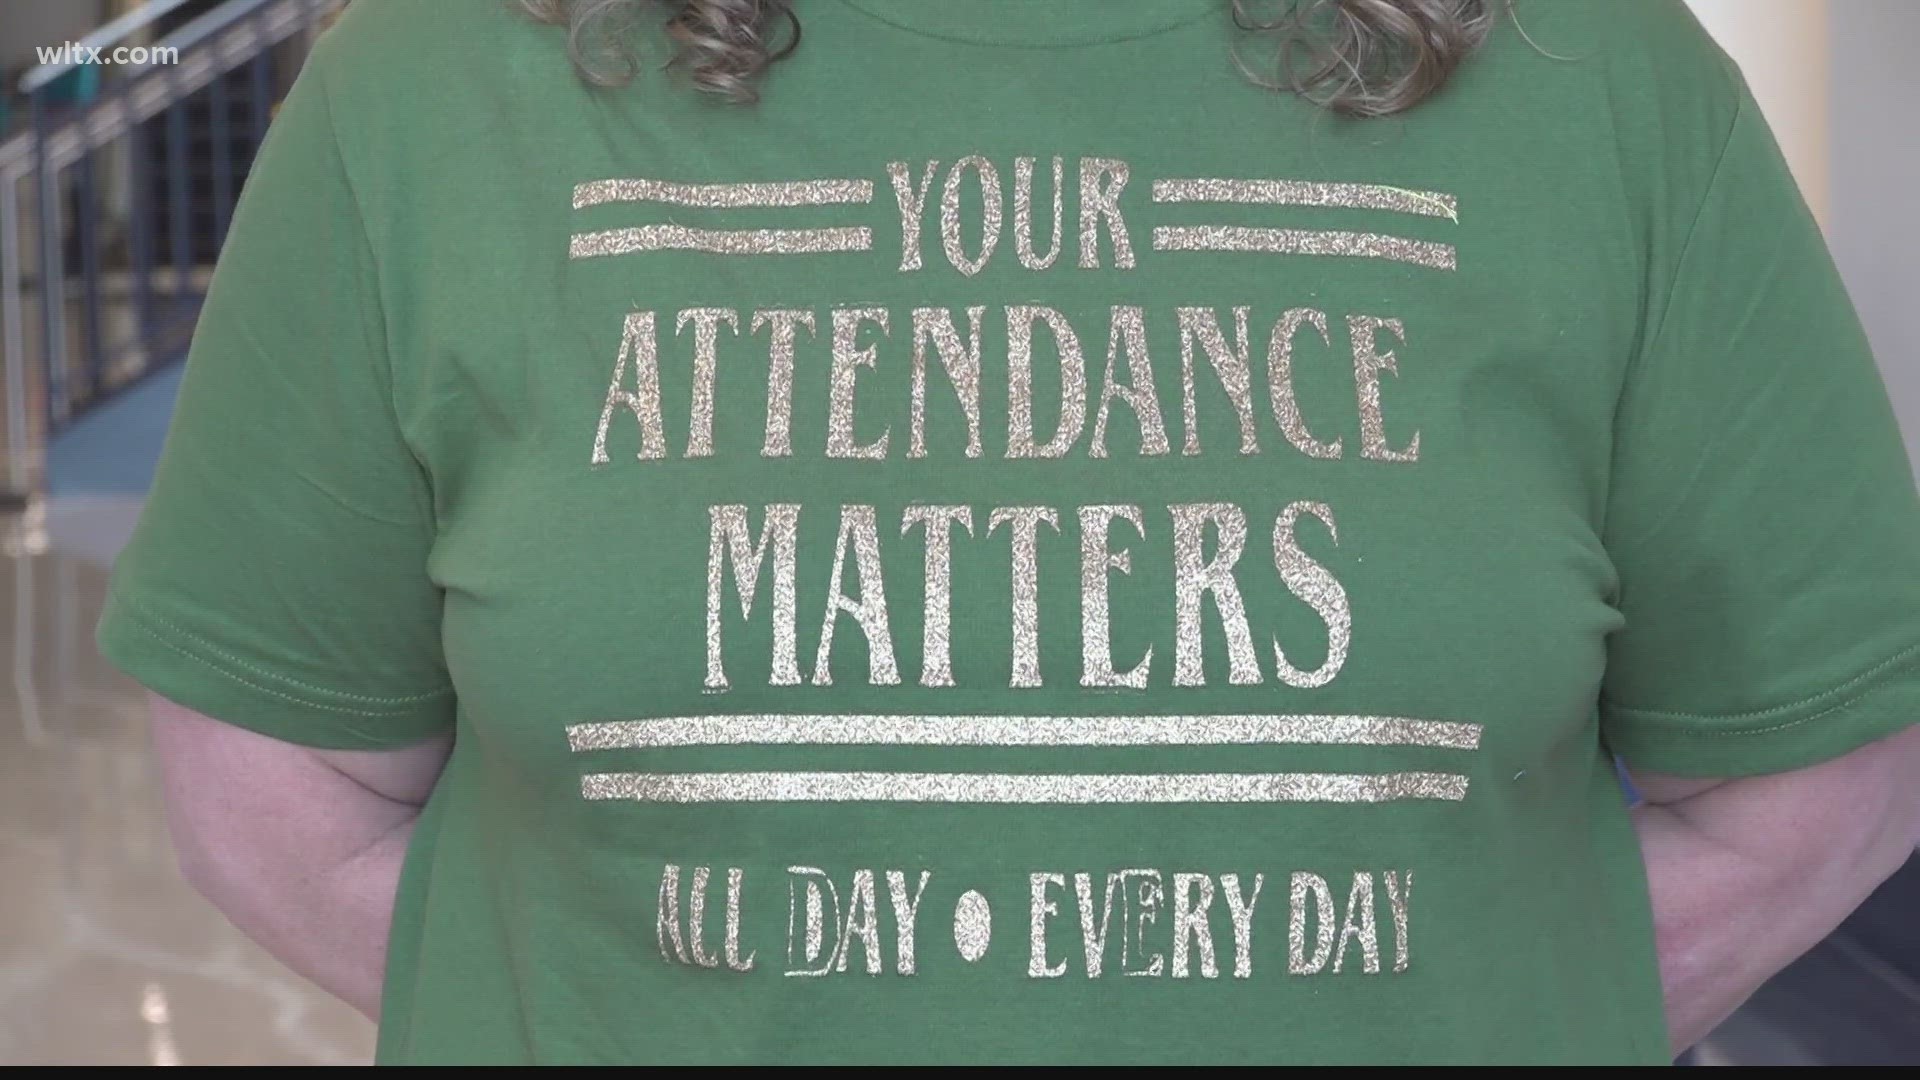 The district says it's seeing a spike in 'chronic absenteeism' a term that describes students missing more than 10% of school.